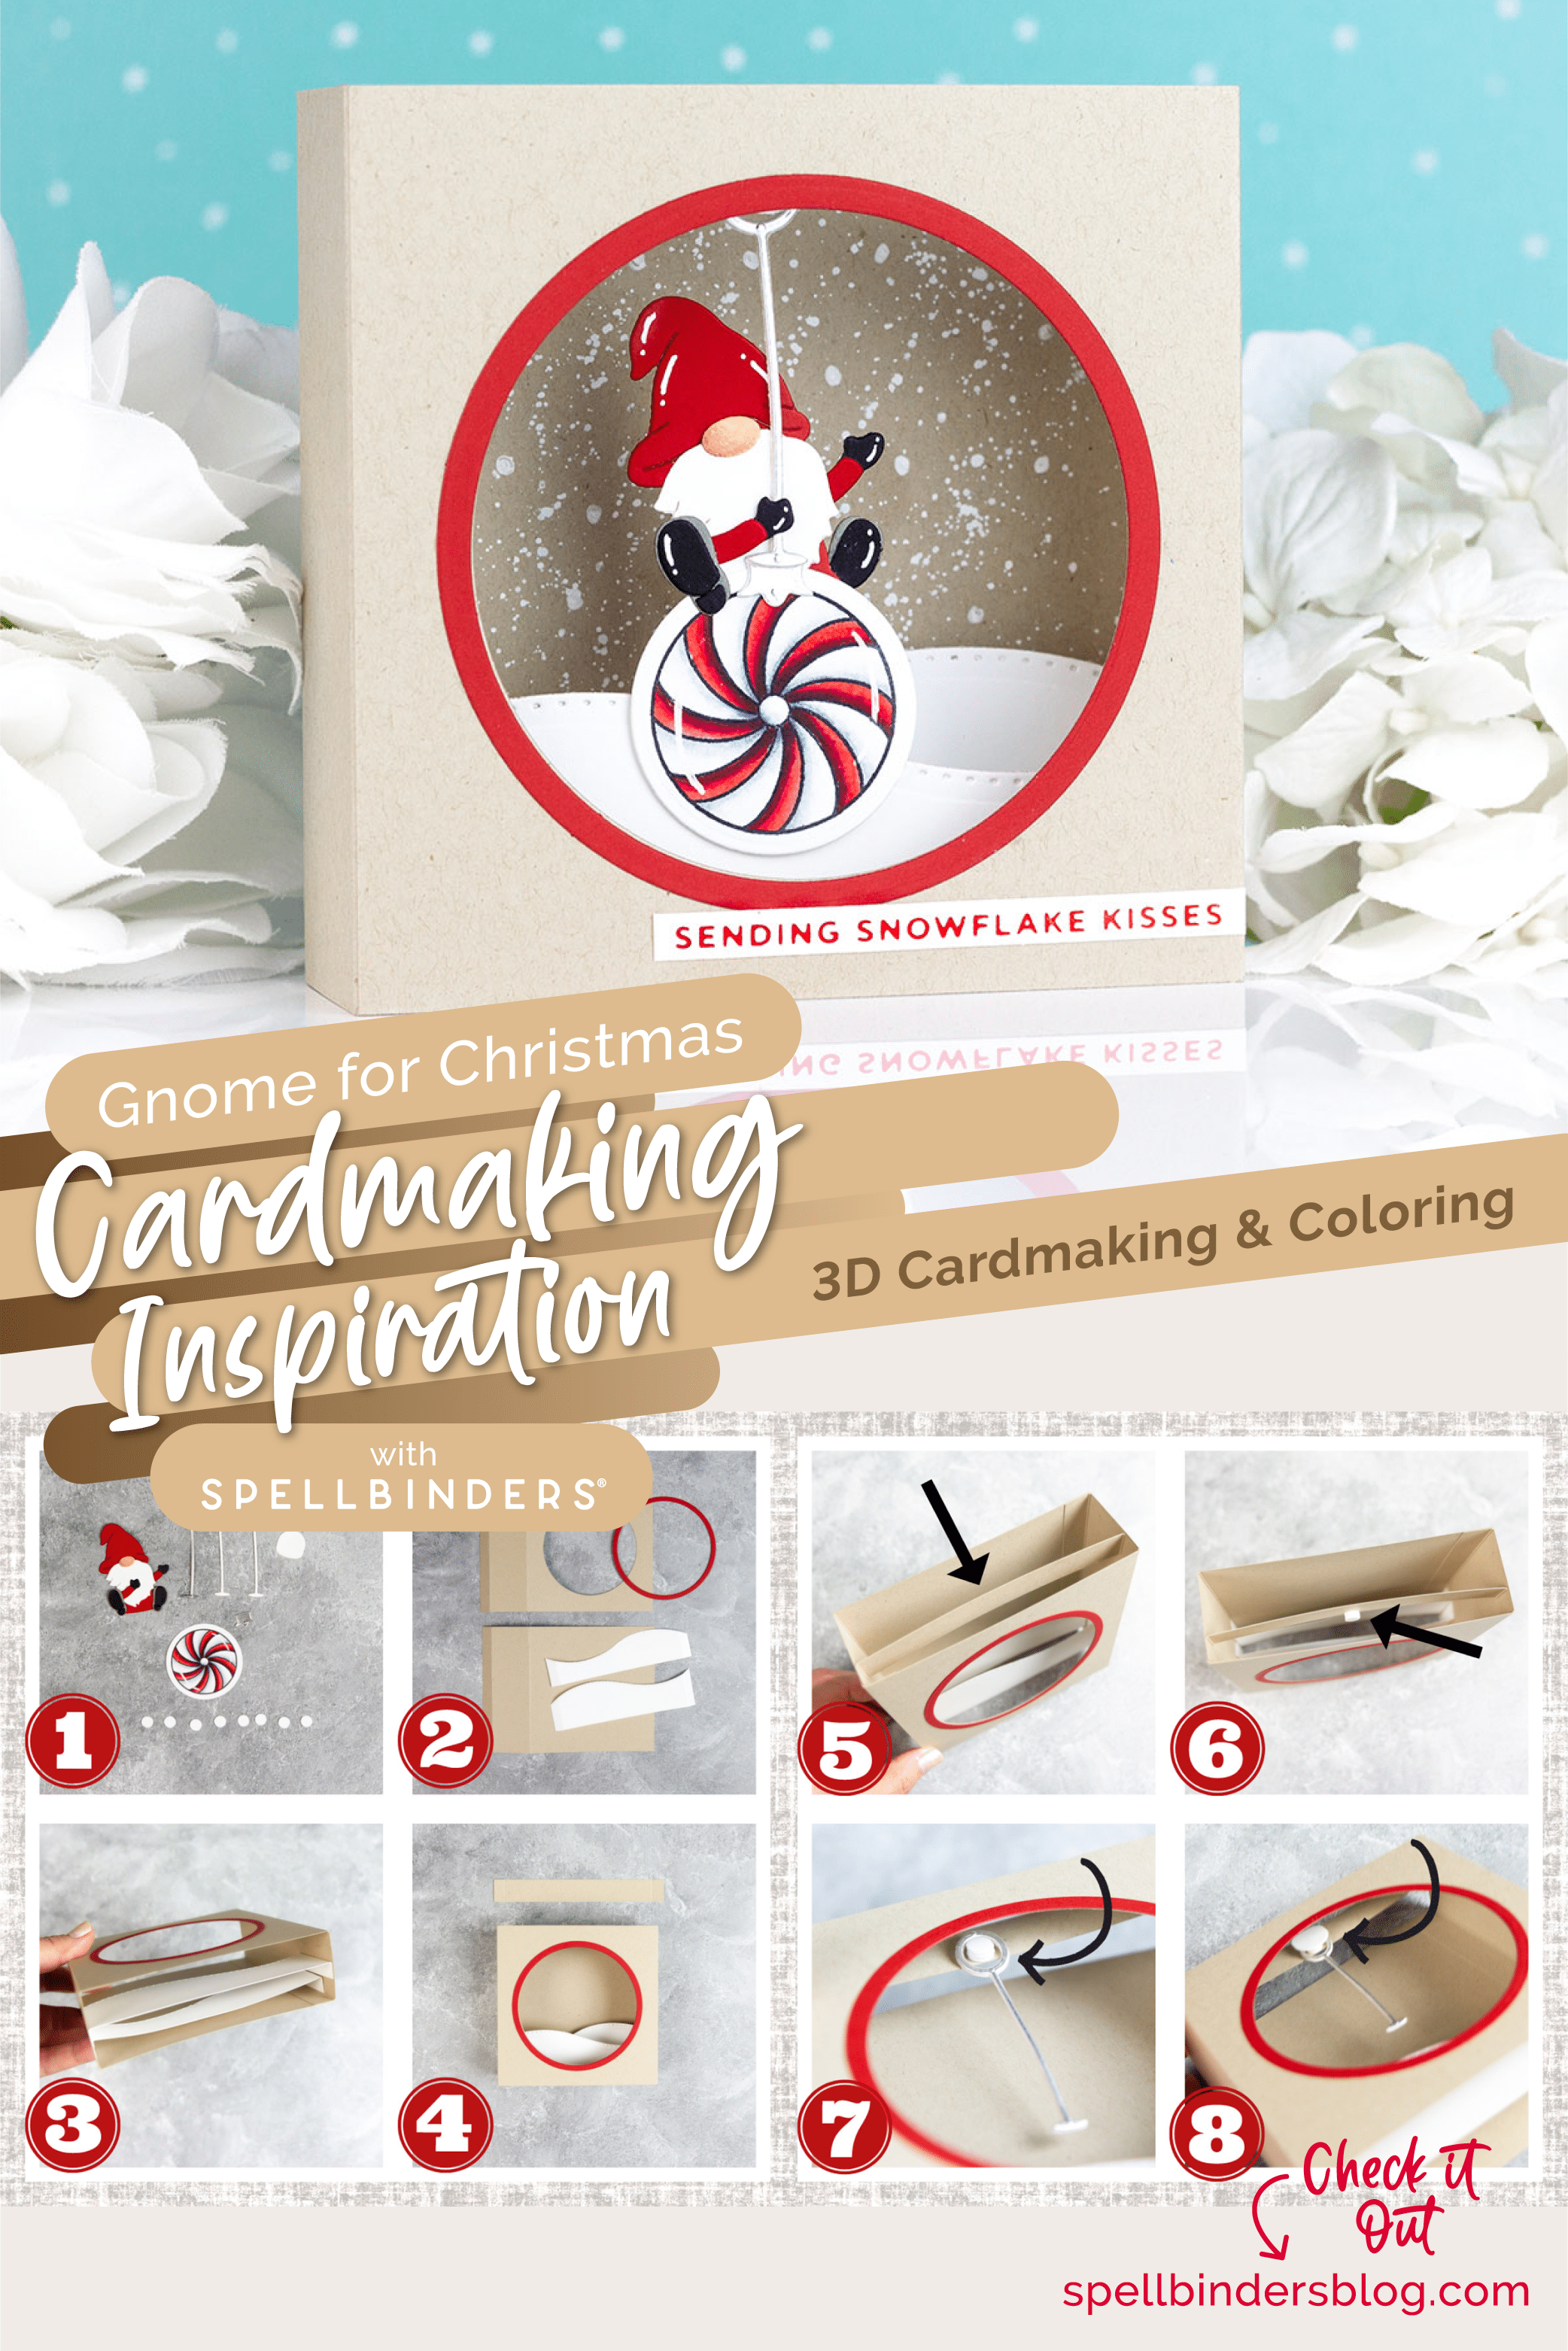 Spellbinders Gnome for Christmas 3D Cardmaking Inspiration